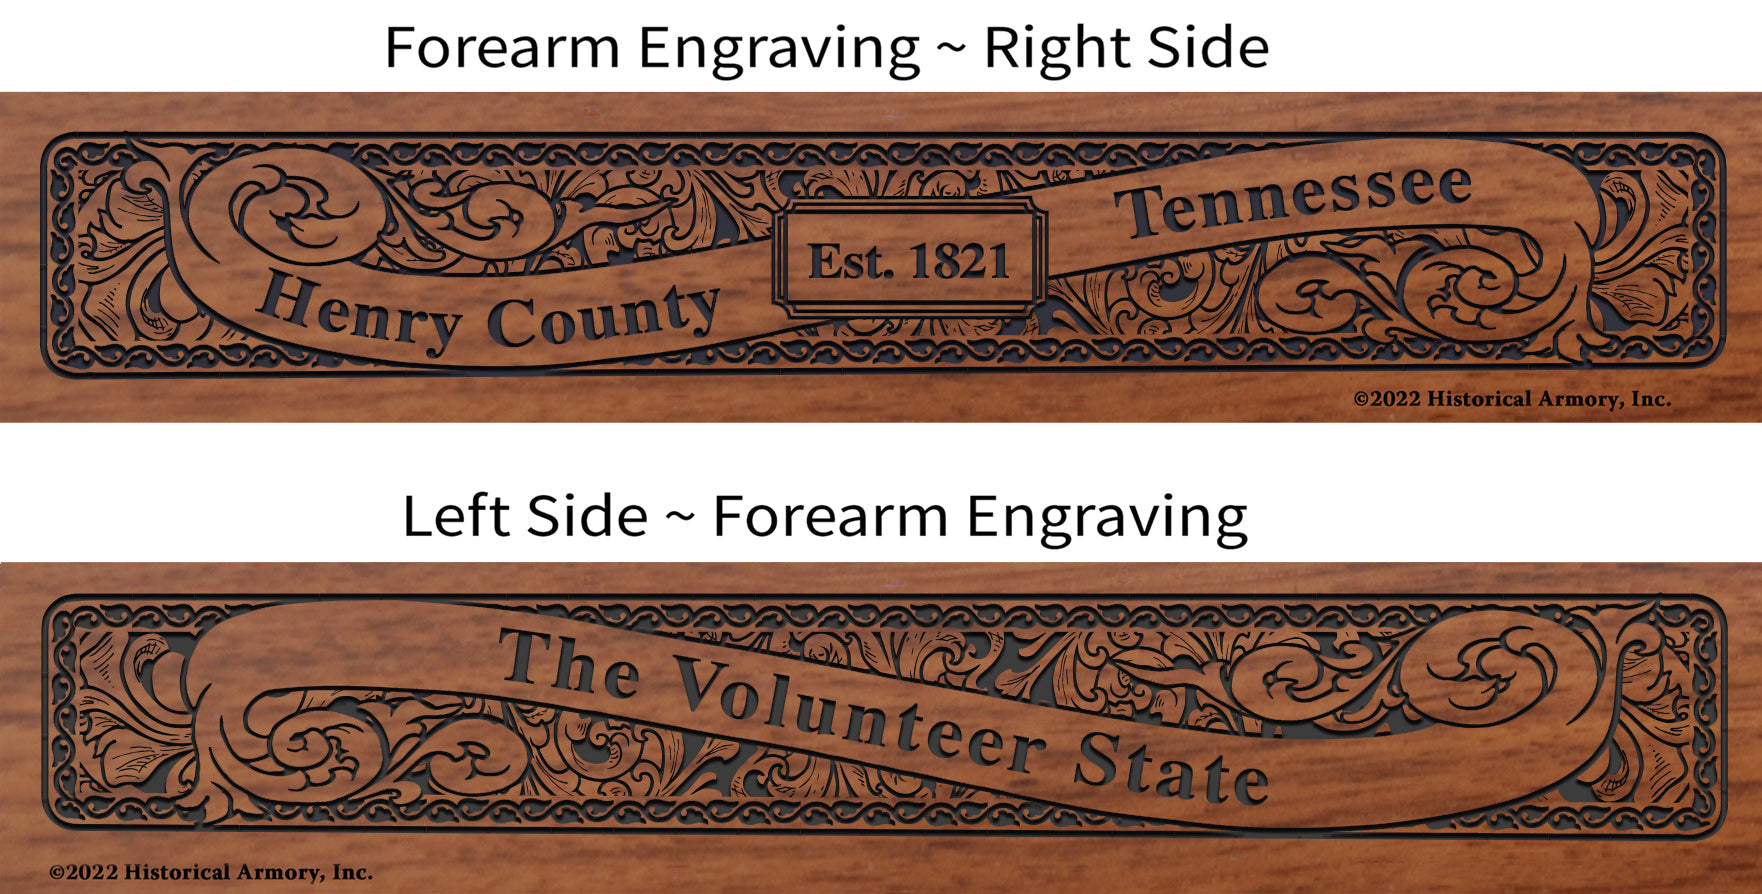 Henry County Tennessee Engraved Rifle Forearm